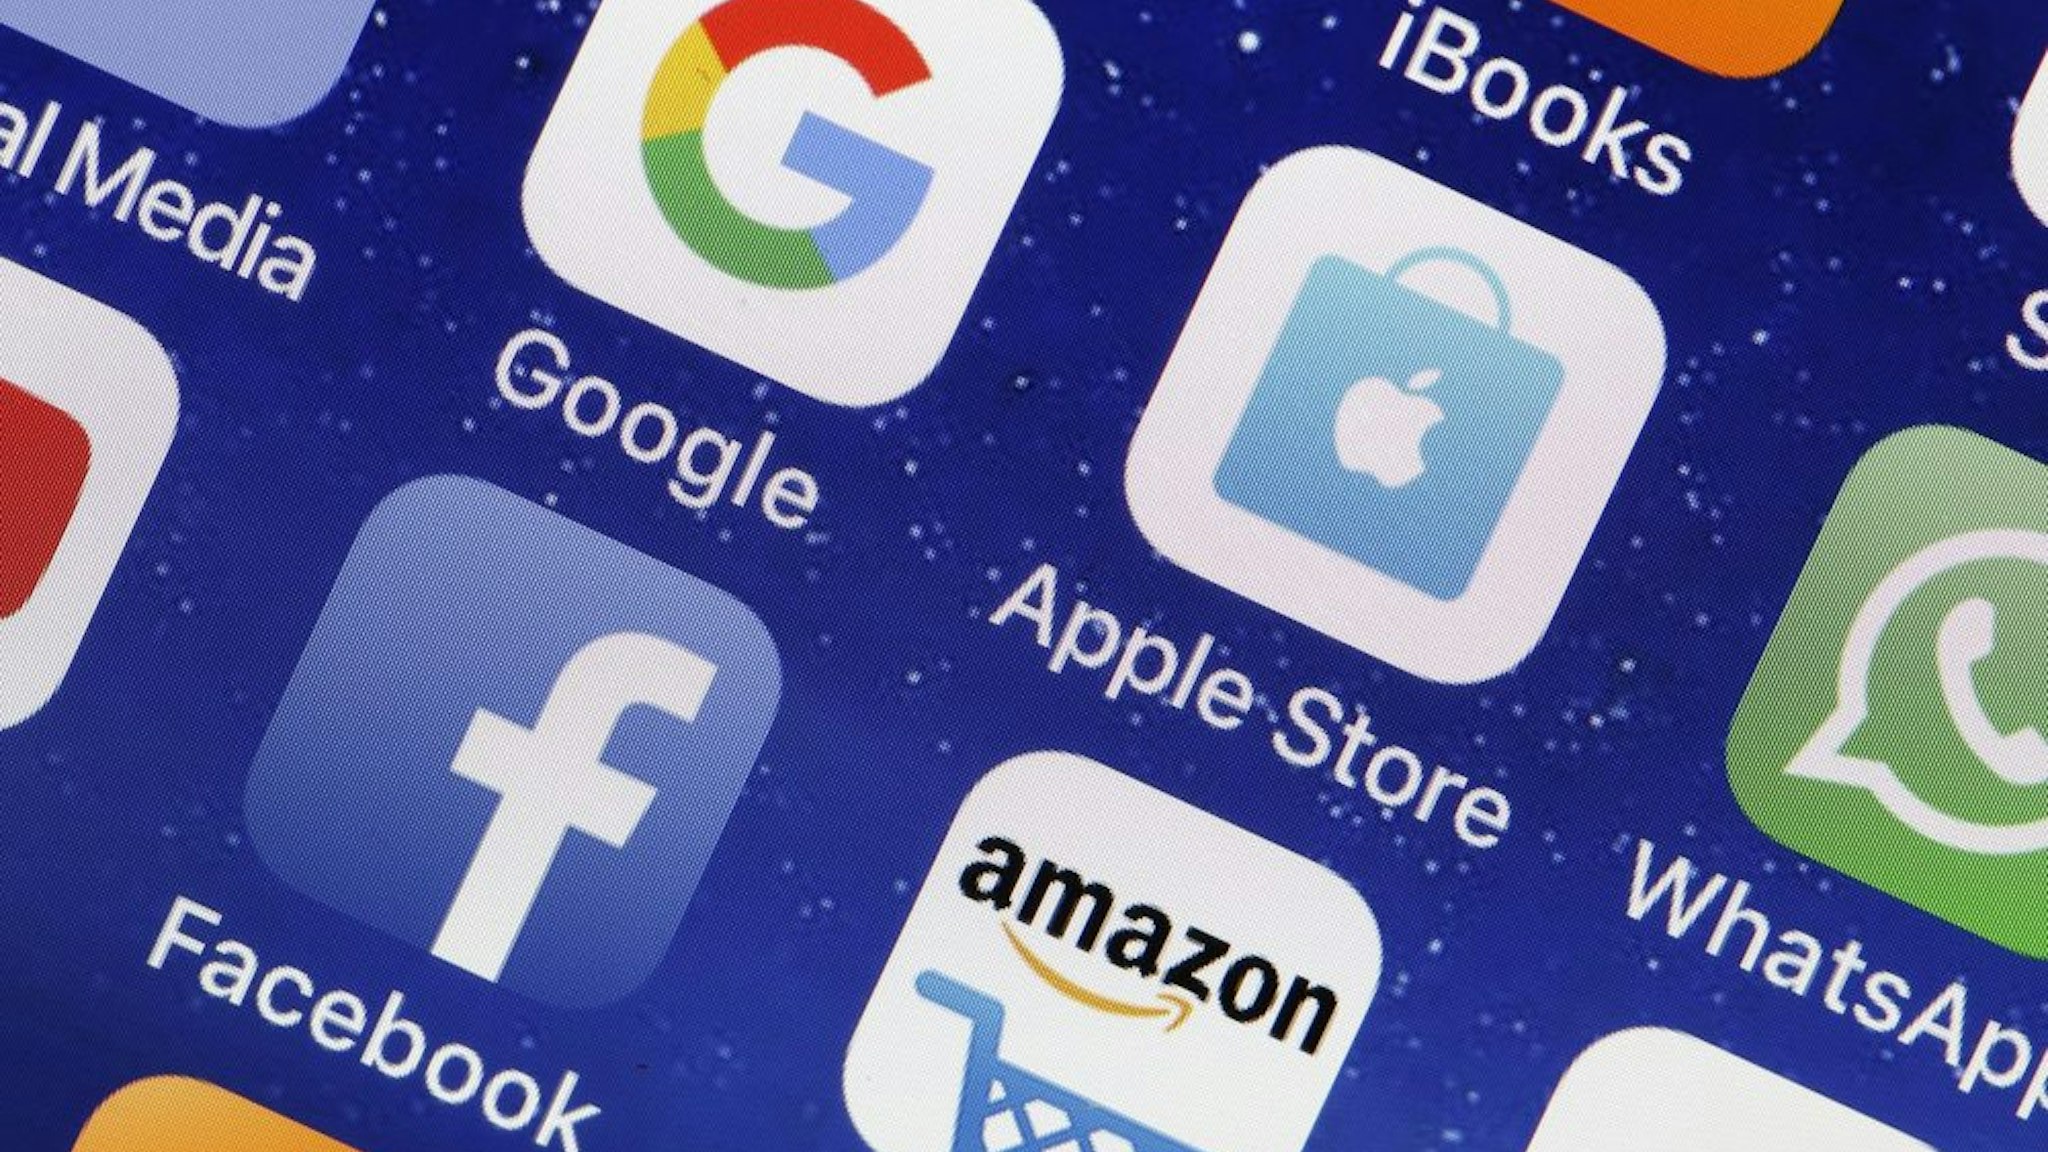 PARIS, FRANCE - MAY 31: In this photo illustration, logos of the Google, Apple, Facebook, and Amazon applications (GAFA) are displayed on the screen of an Apple iPhone on May 31, 2018 in Paris, France. The acronym GAFA refers to the four most powerful companies in the world of the internet: Google, Apple, Facebook and Amazon. The European Union has decided to better tax the giants of the internet with Brussels proposing to tax 3% of income generated by the data of users of Internet companies. This new tax would bring in 5 billion euros a year in the European Union.